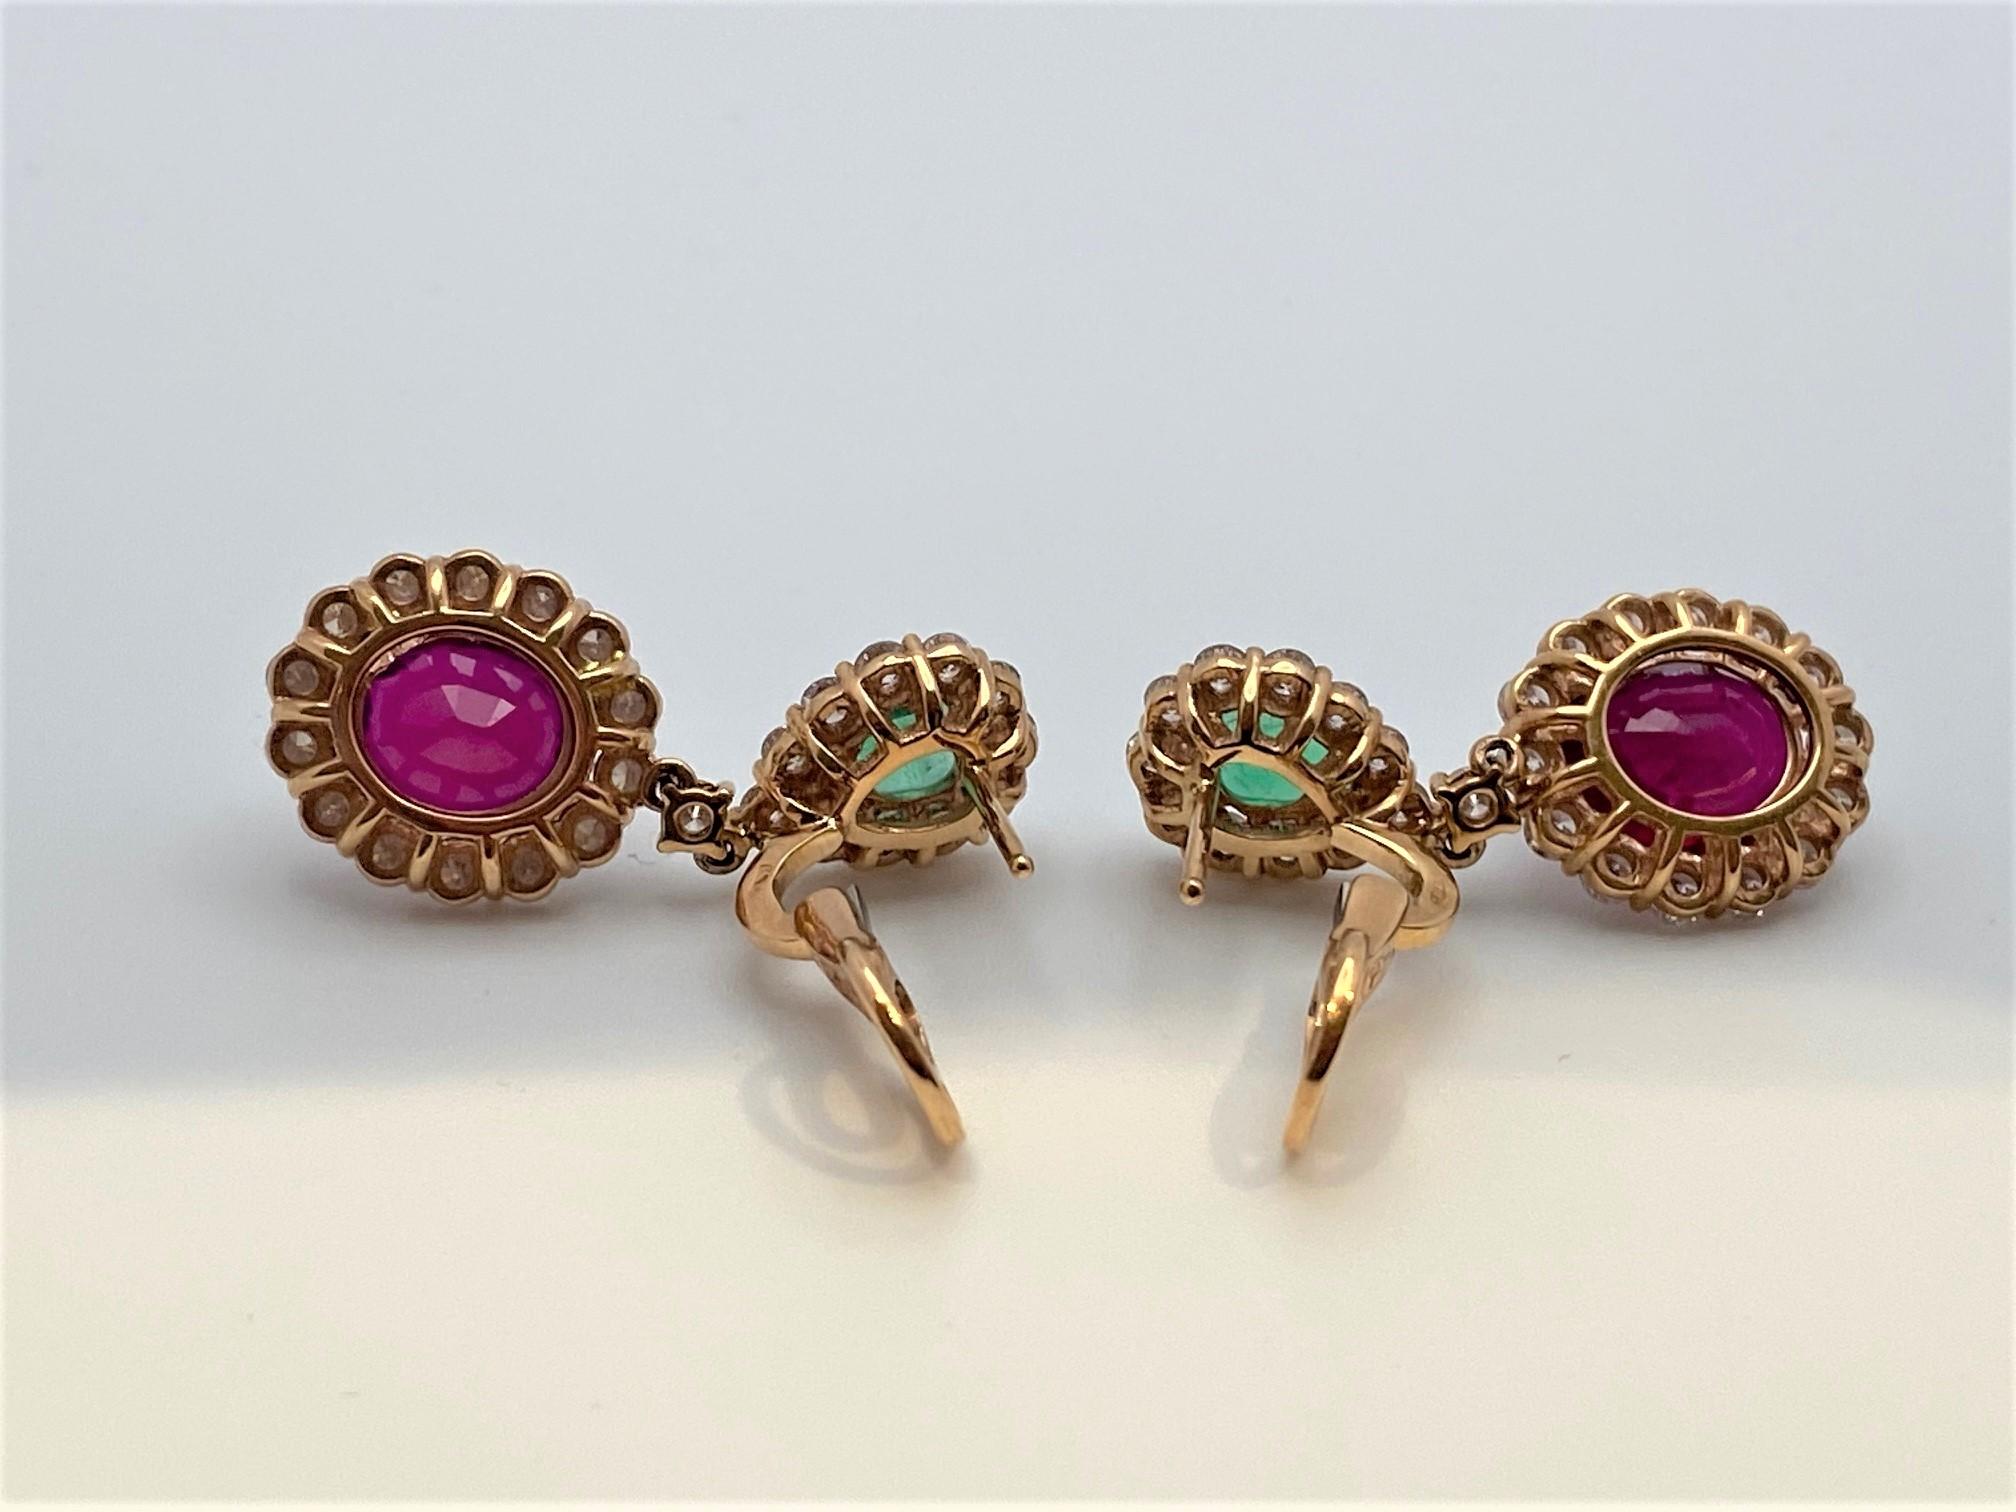 Beautiful lady's drop earrings in 18KT rose gold featuring tear drop shaped emeralds weighing 1.05 carats with a French clip back set over oval cut vivid red rubies weighing 7.45 carats. Both gemstones are surrounded by round brilliant cut white